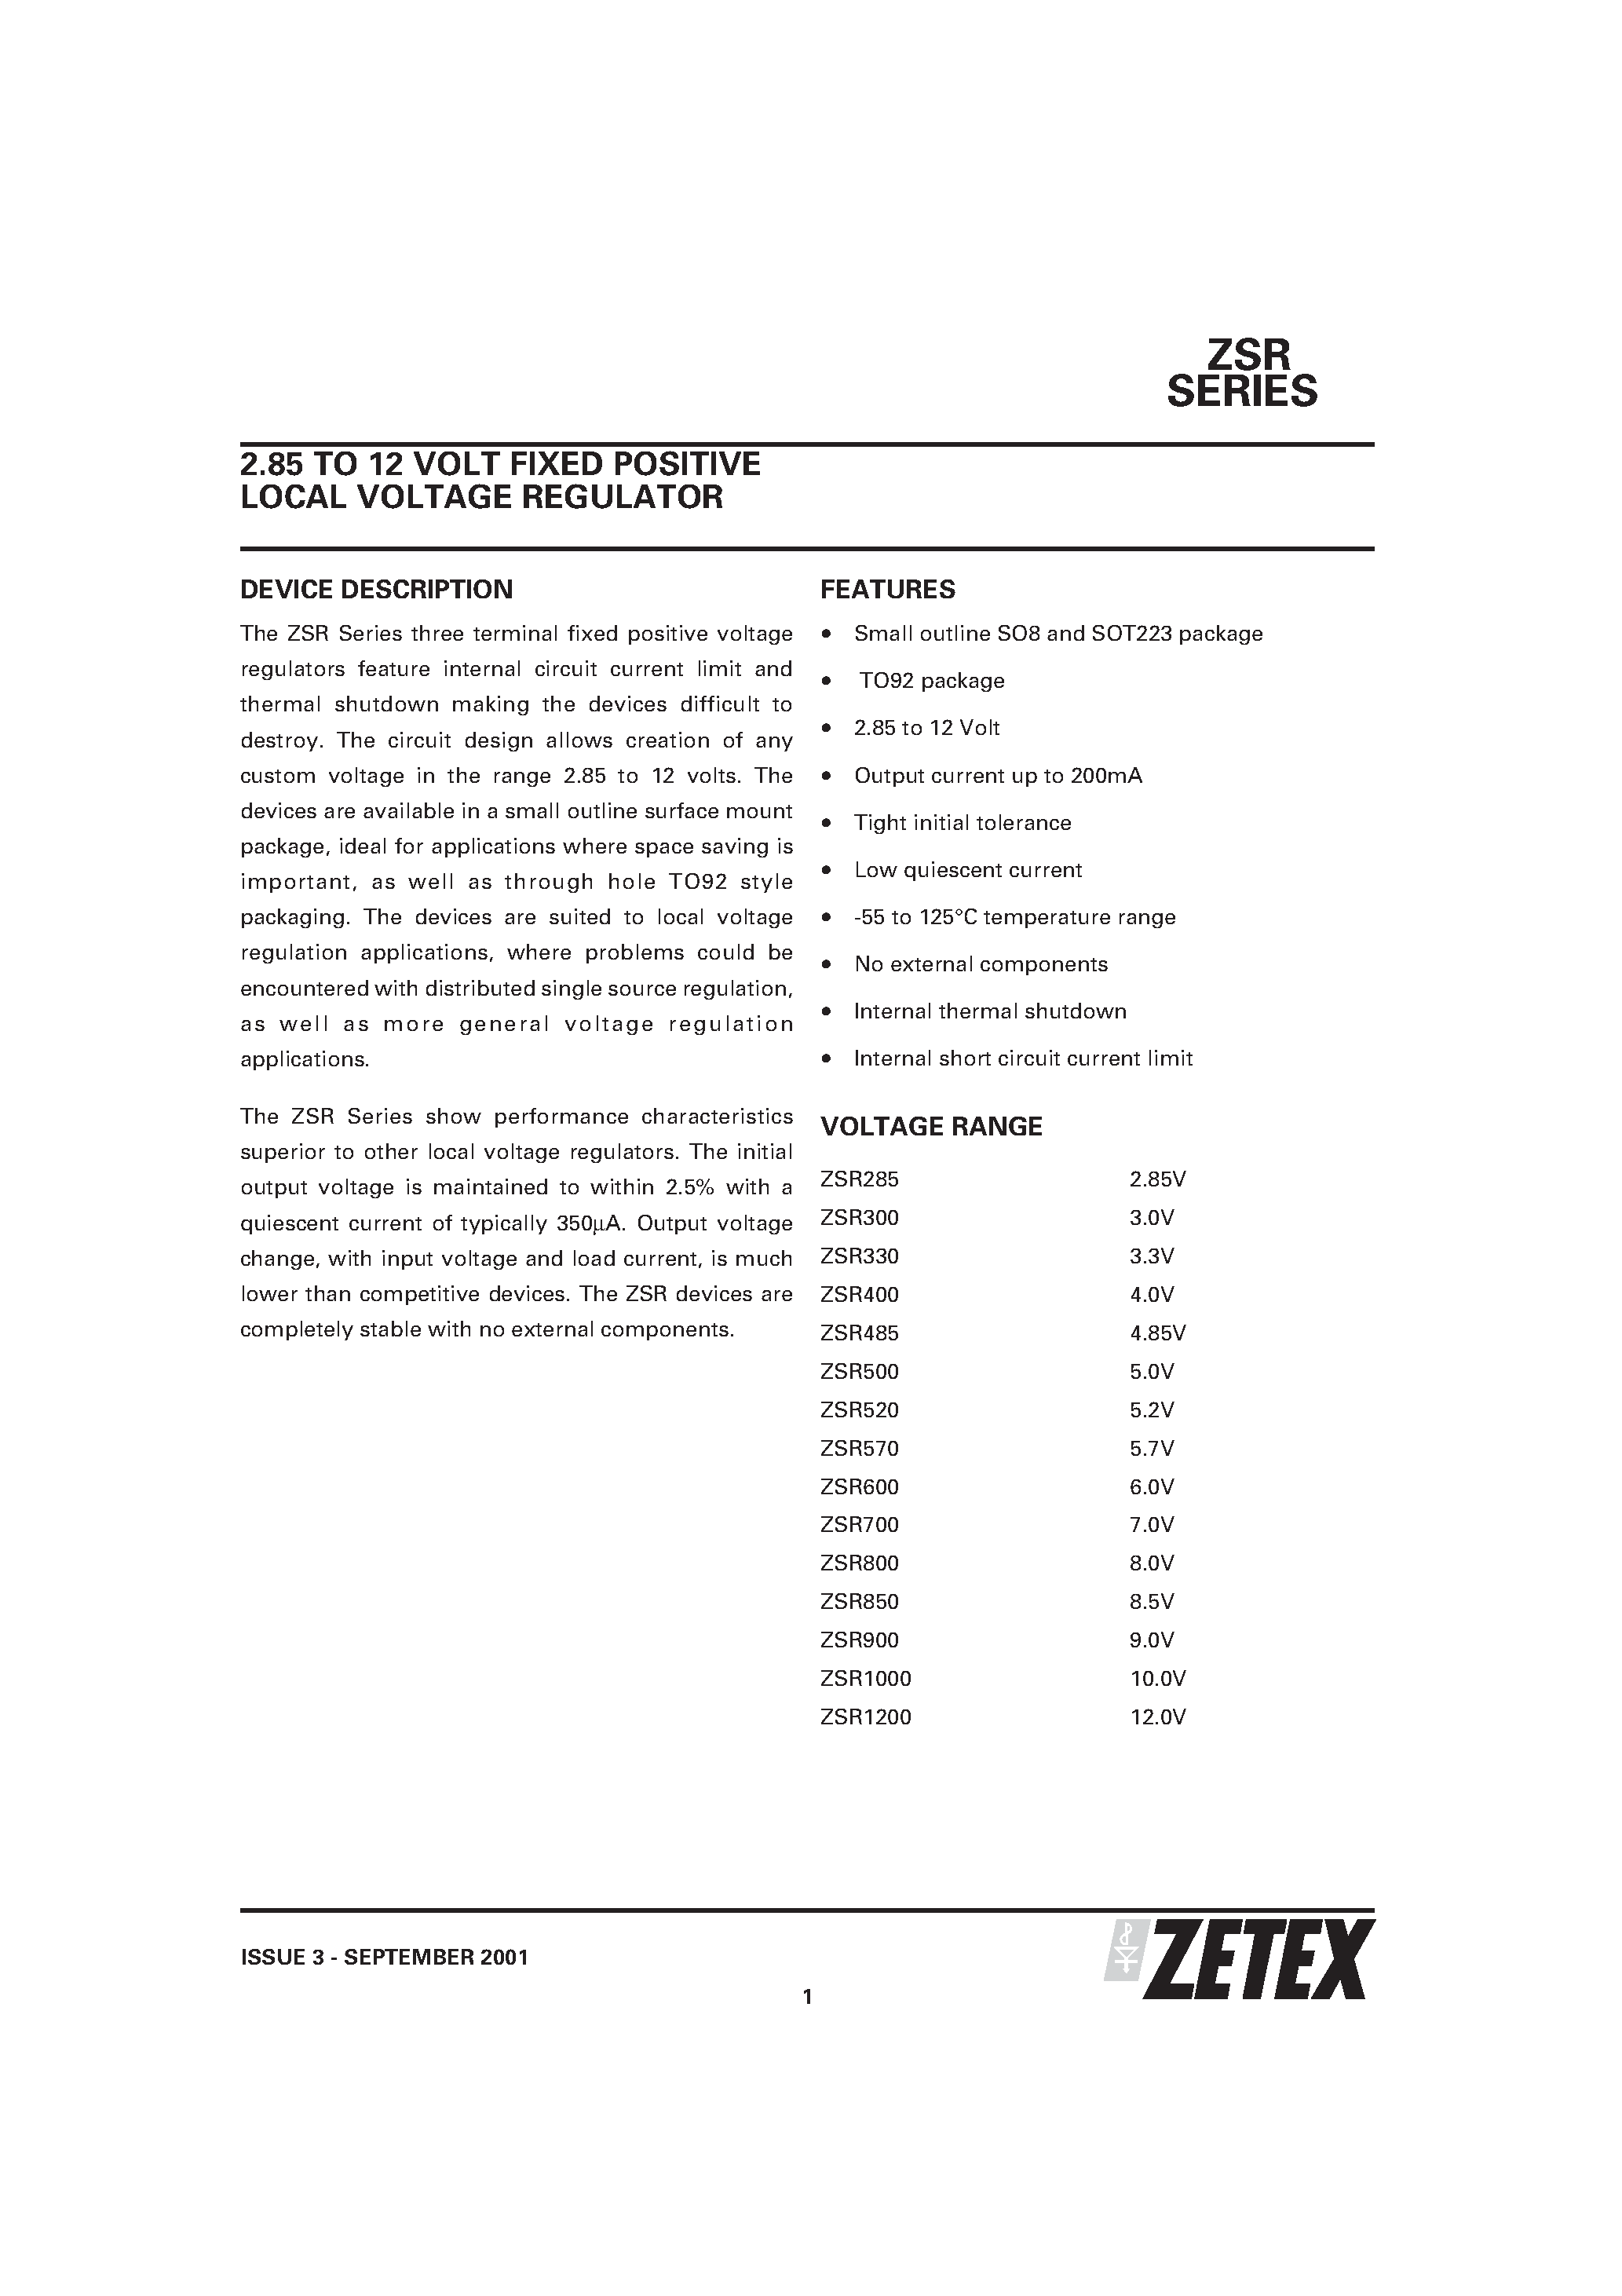 Datasheet ZSR500G - 2.85 TO 12 VOLT FIXED POSITIVE LOCAL VOLTAGE REGULATOR page 1